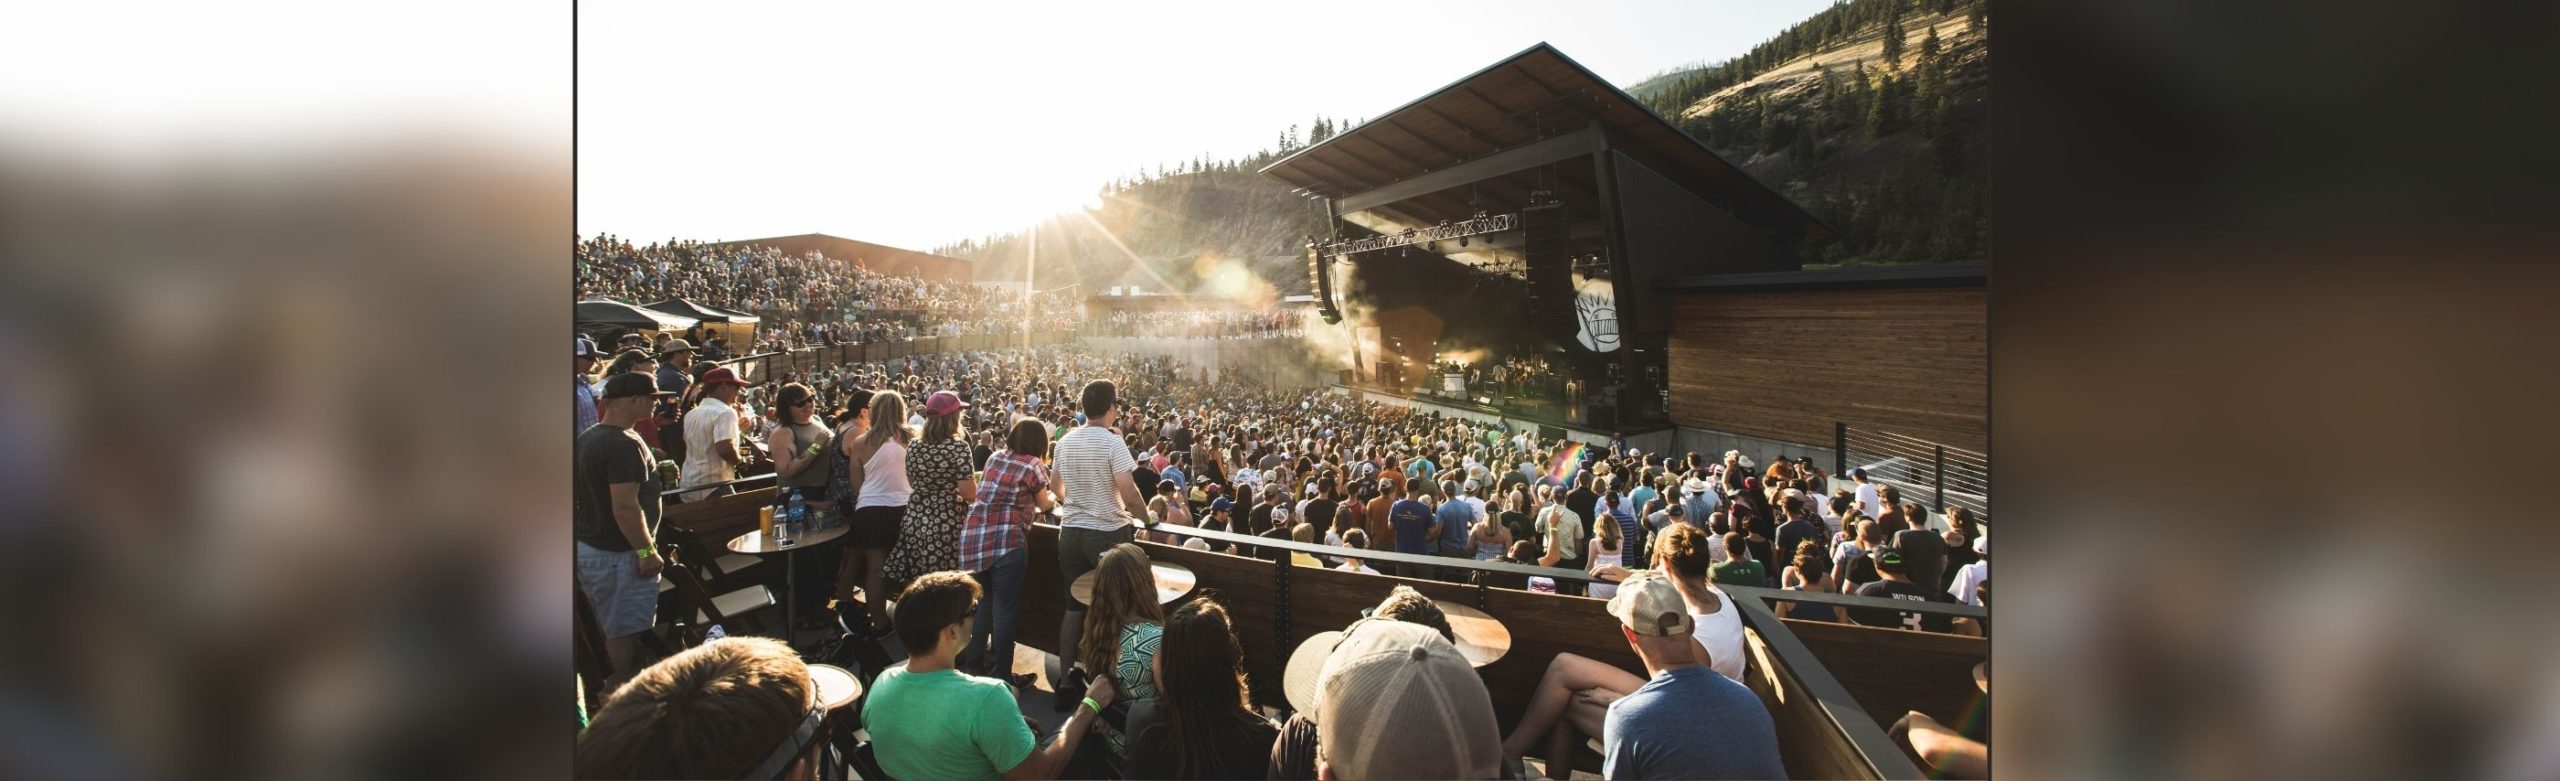 SPECIAL OFFER: Premium Box Seats Released for Fleet Foxes at KettleHouse Amphitheater Image